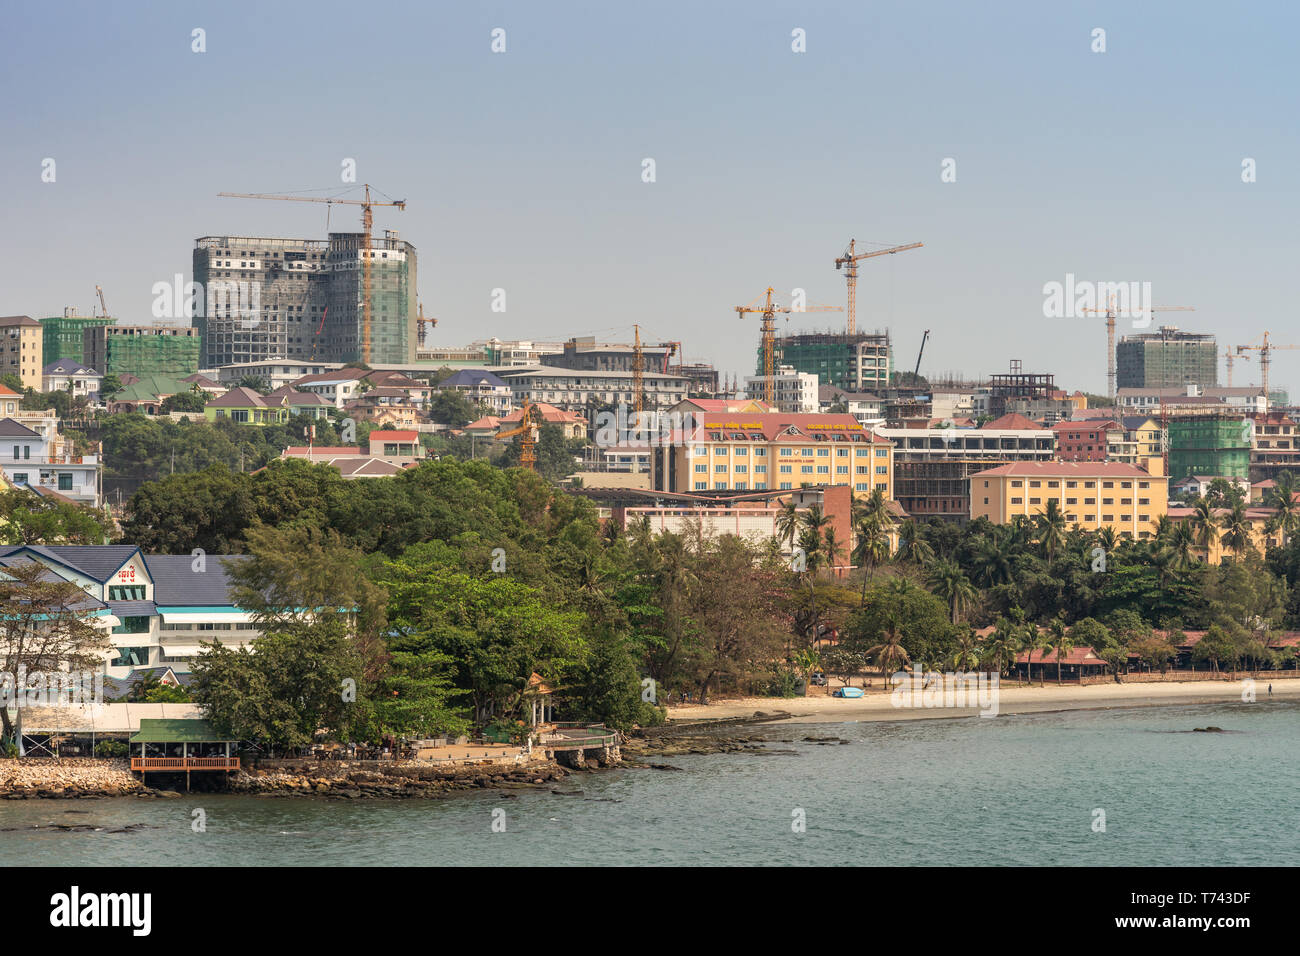 Sihanoukville, Cambodia - March 15, 2019: Town turned into massive construction site of tall high rise buildings under light blue sky, yellow cranes.  Stock Photo